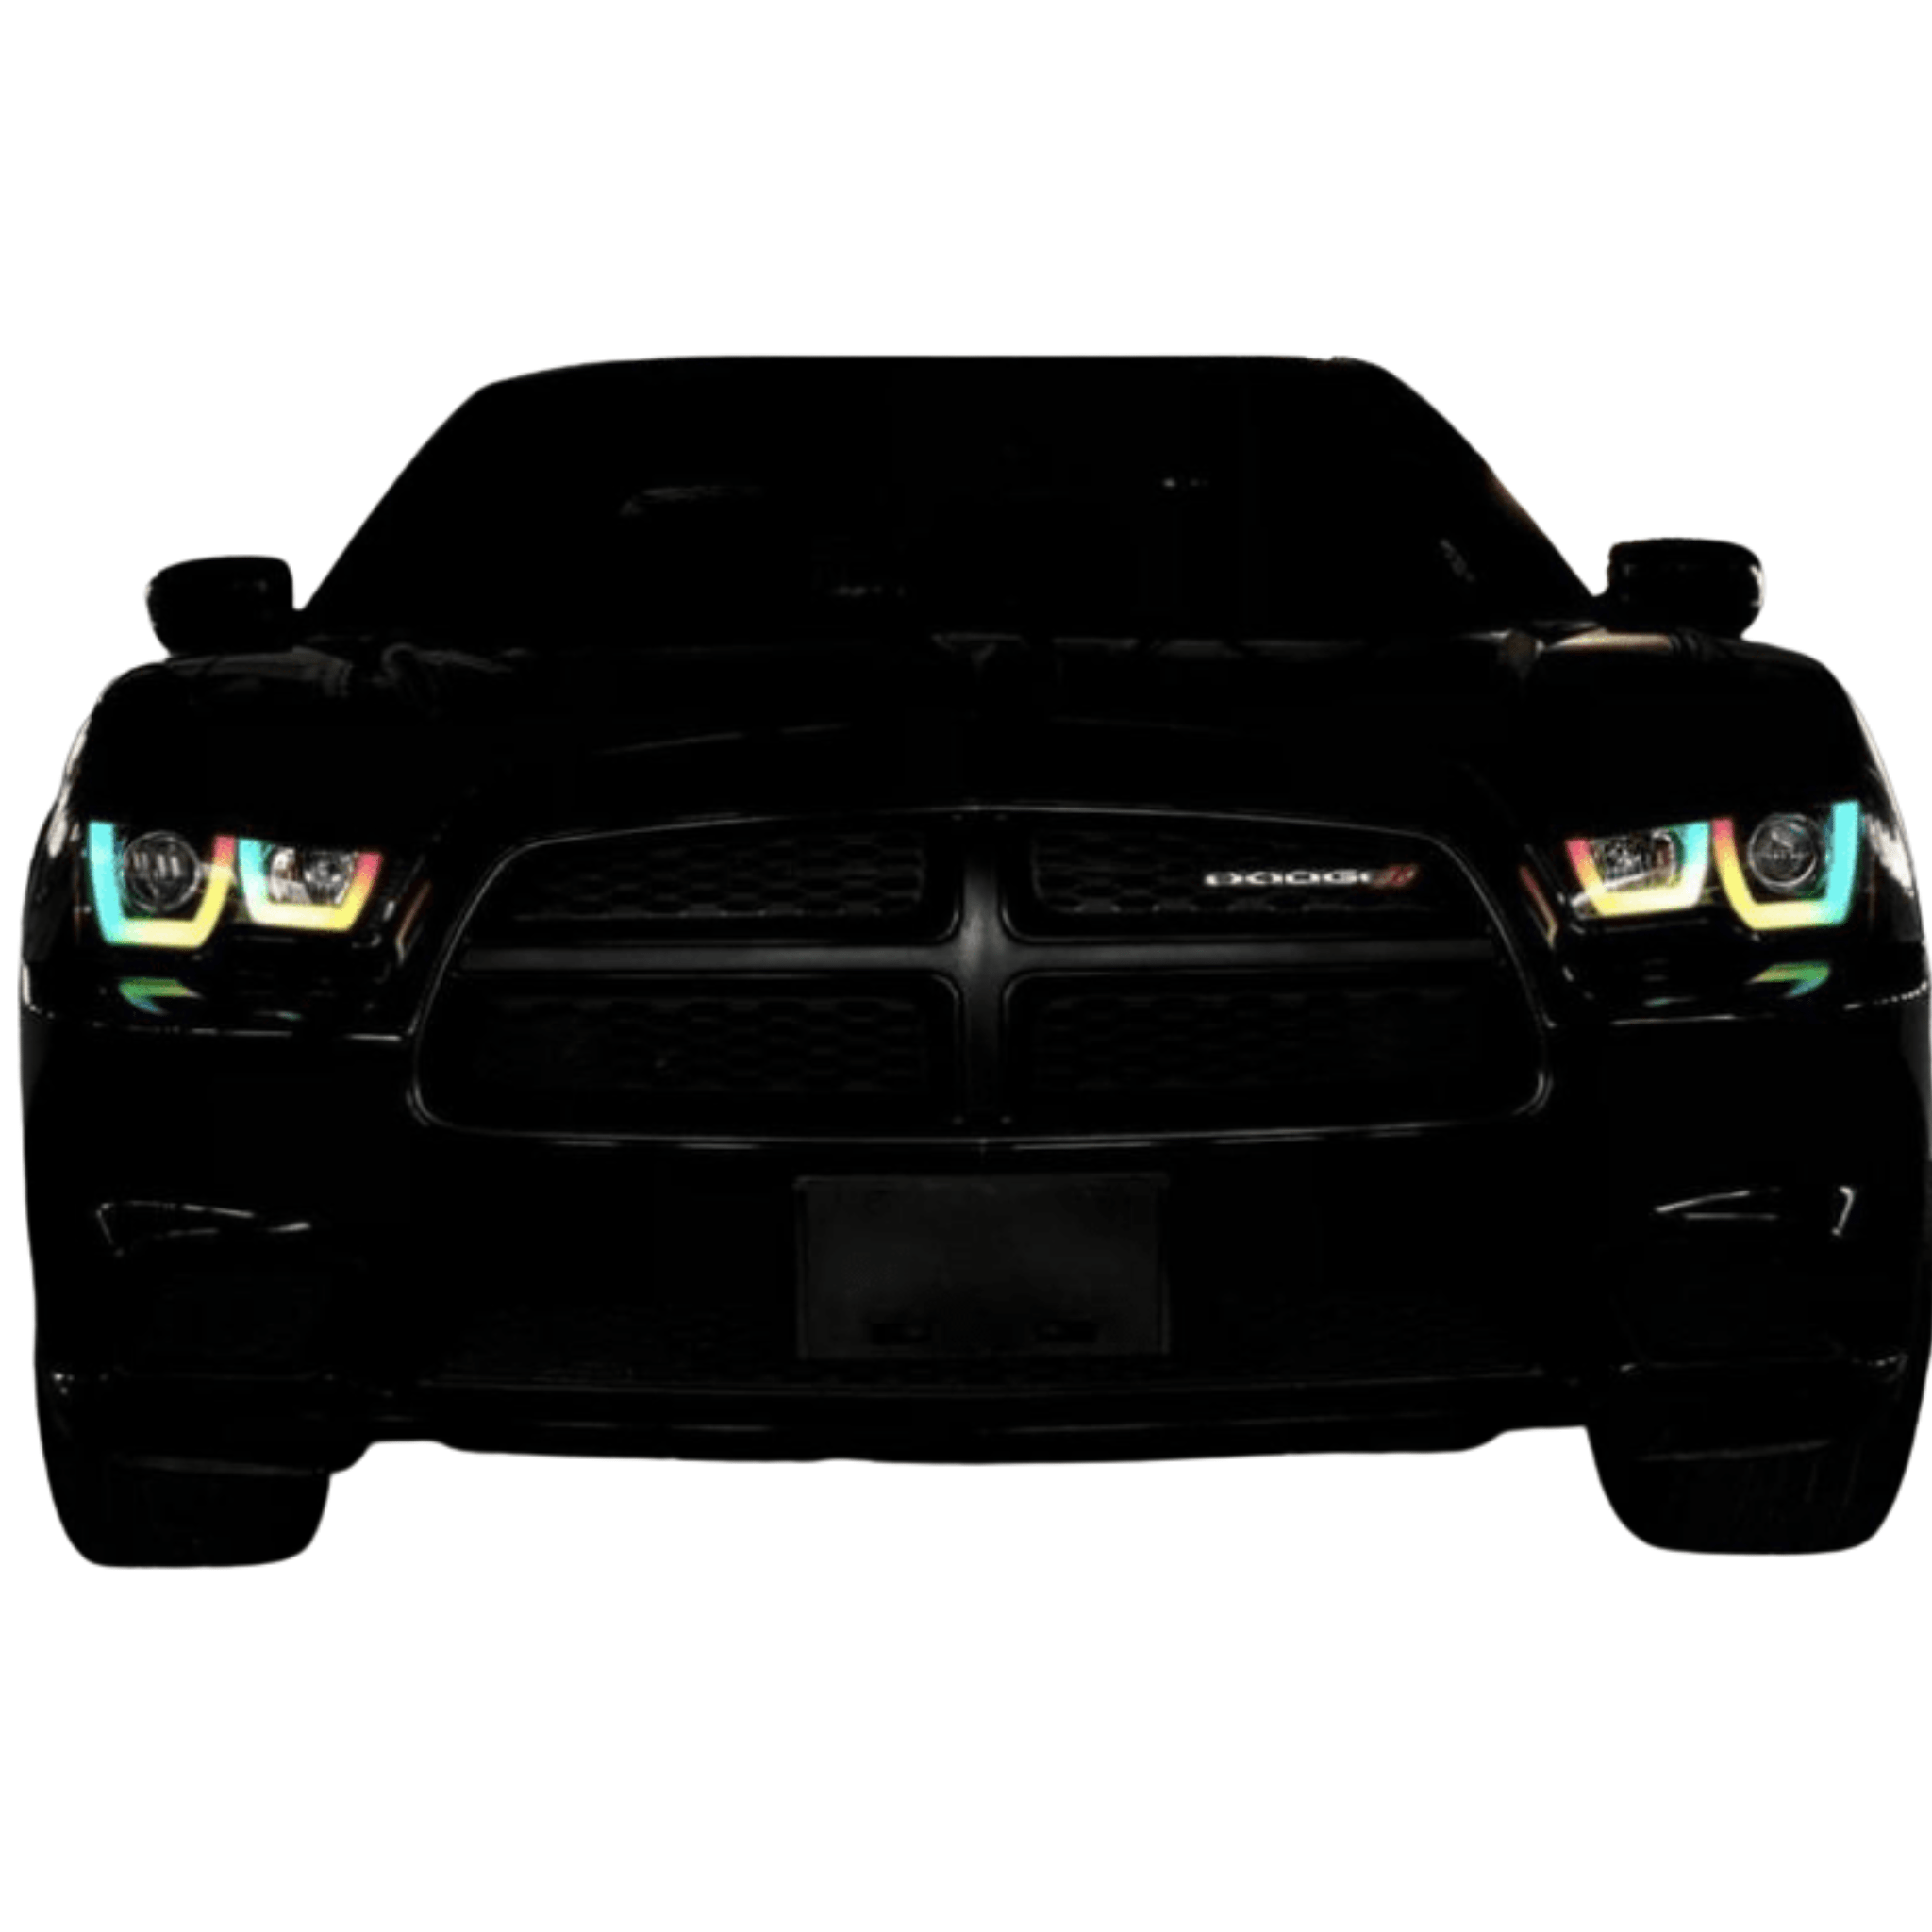 2011-2014 Dodge Charger Flow Series/Color Chasing DRL Boards (for Spec